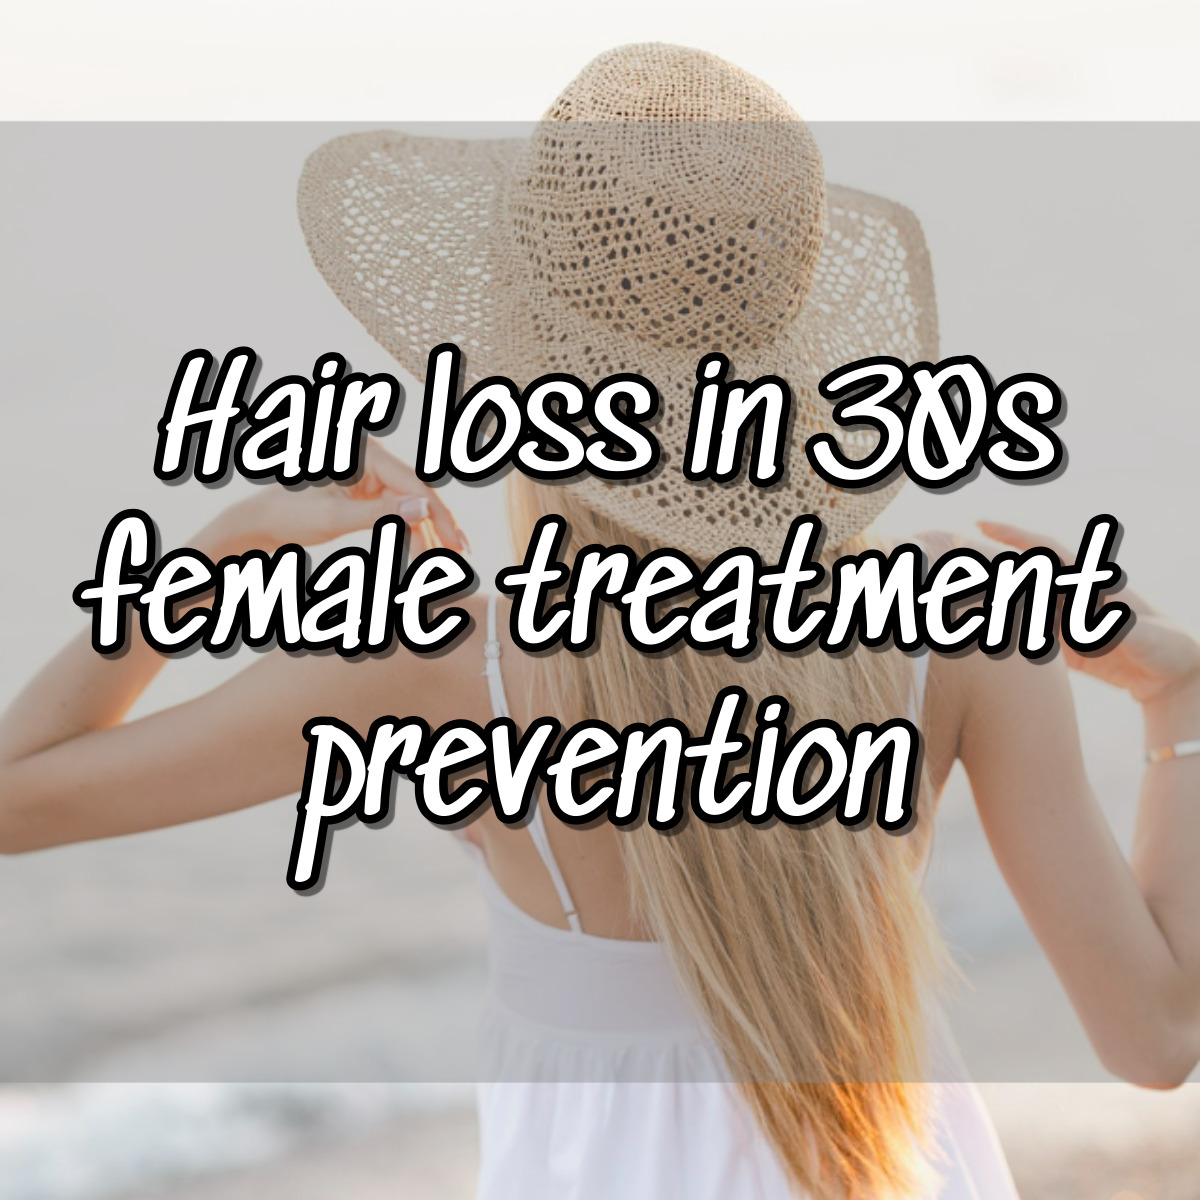 Hair loss in 30s female treatment prevention